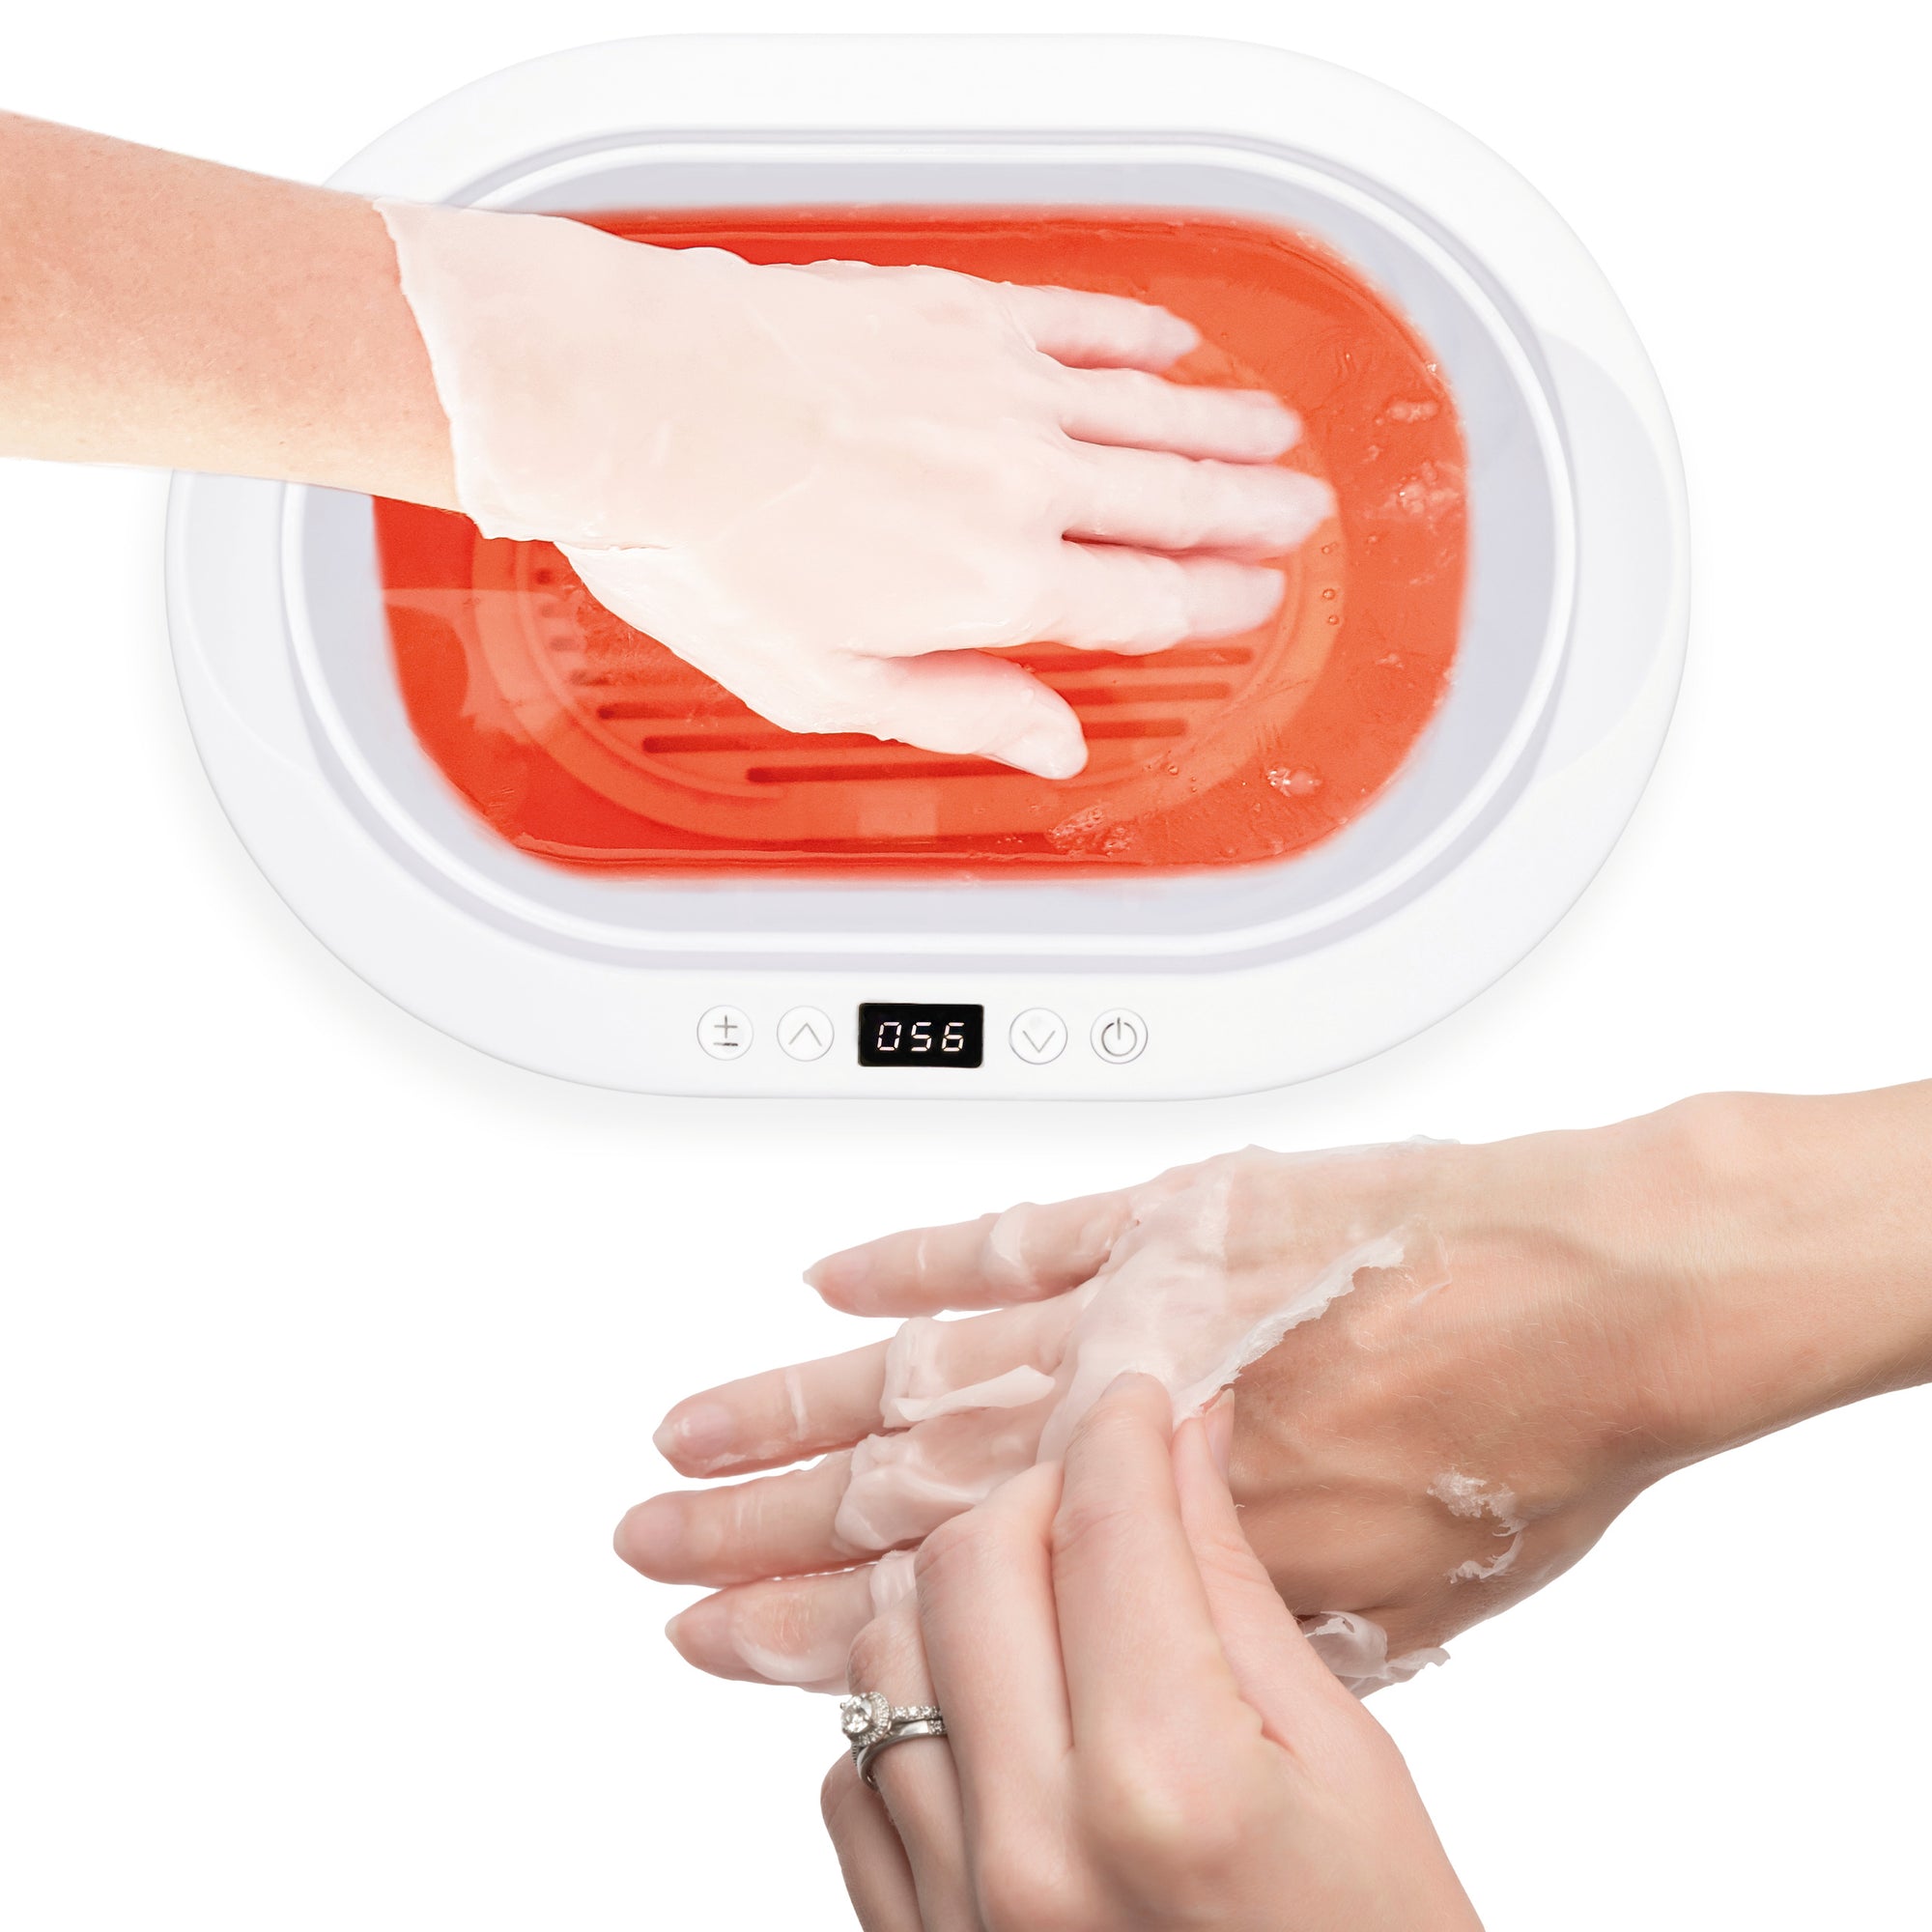 The Many Uses & Benefits of a Paraffin Wax Bath Explained